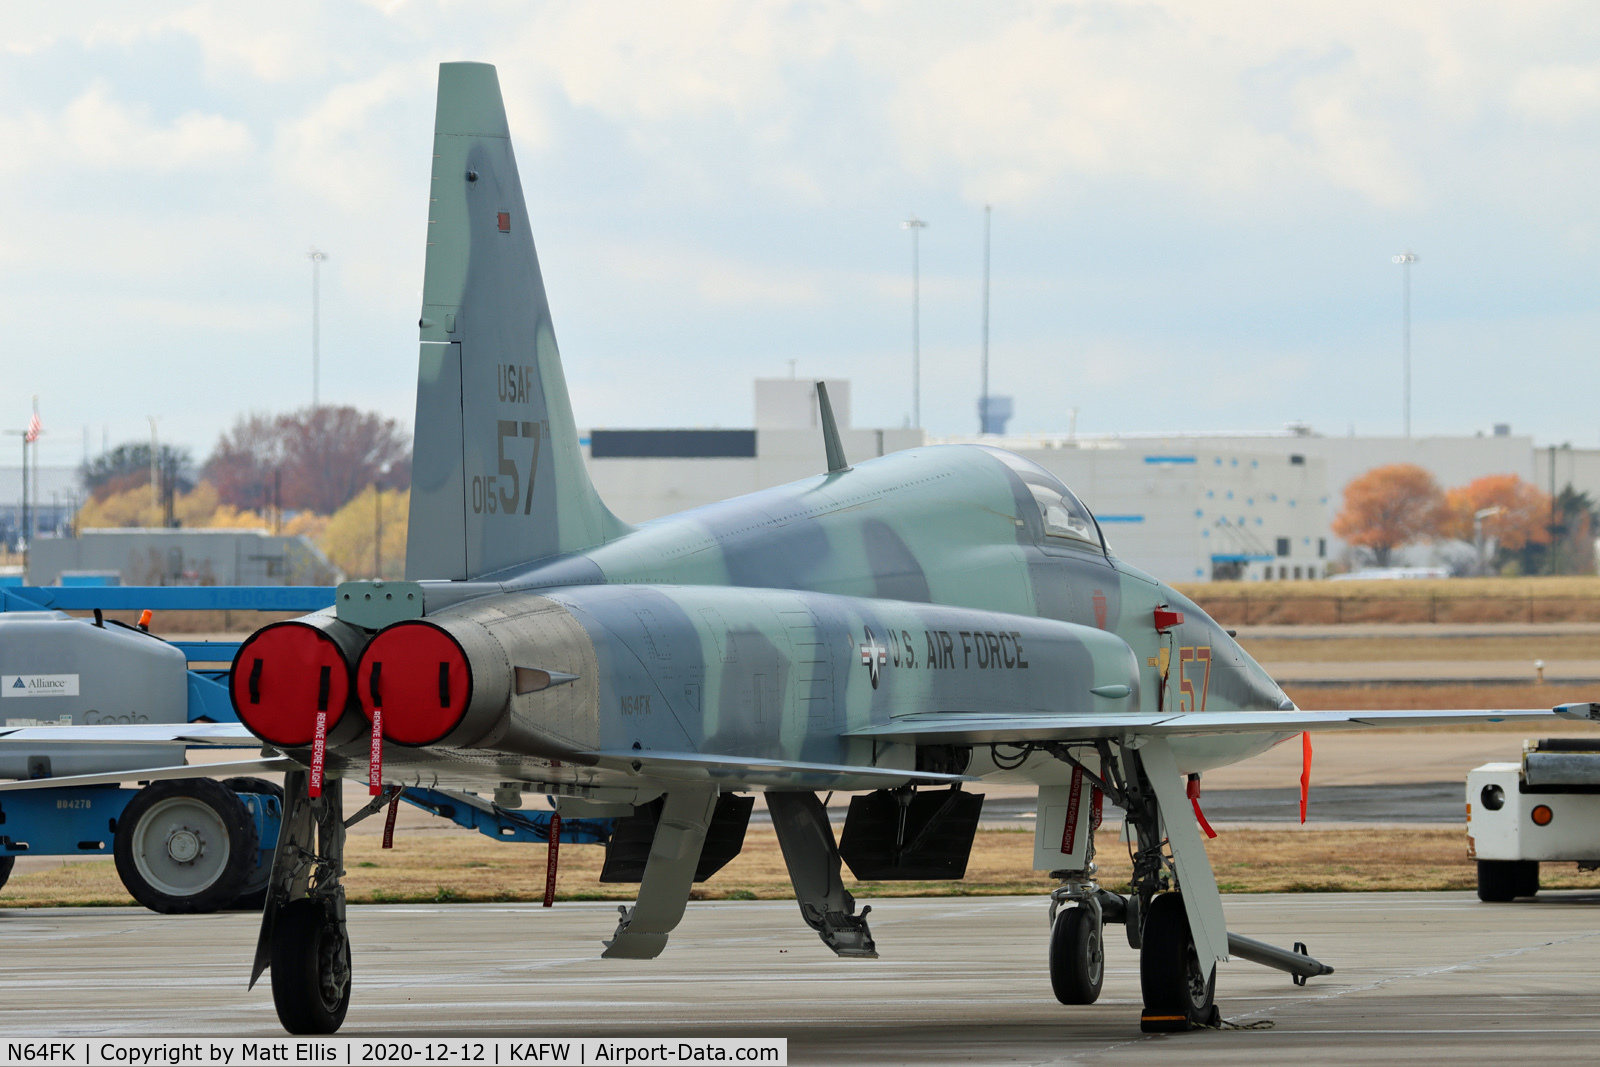 N64FK, 1979 Northrop F-5E Tiger II C/N L.1004, F-5E N64FK with fake USAF markings for the 01557 for the 